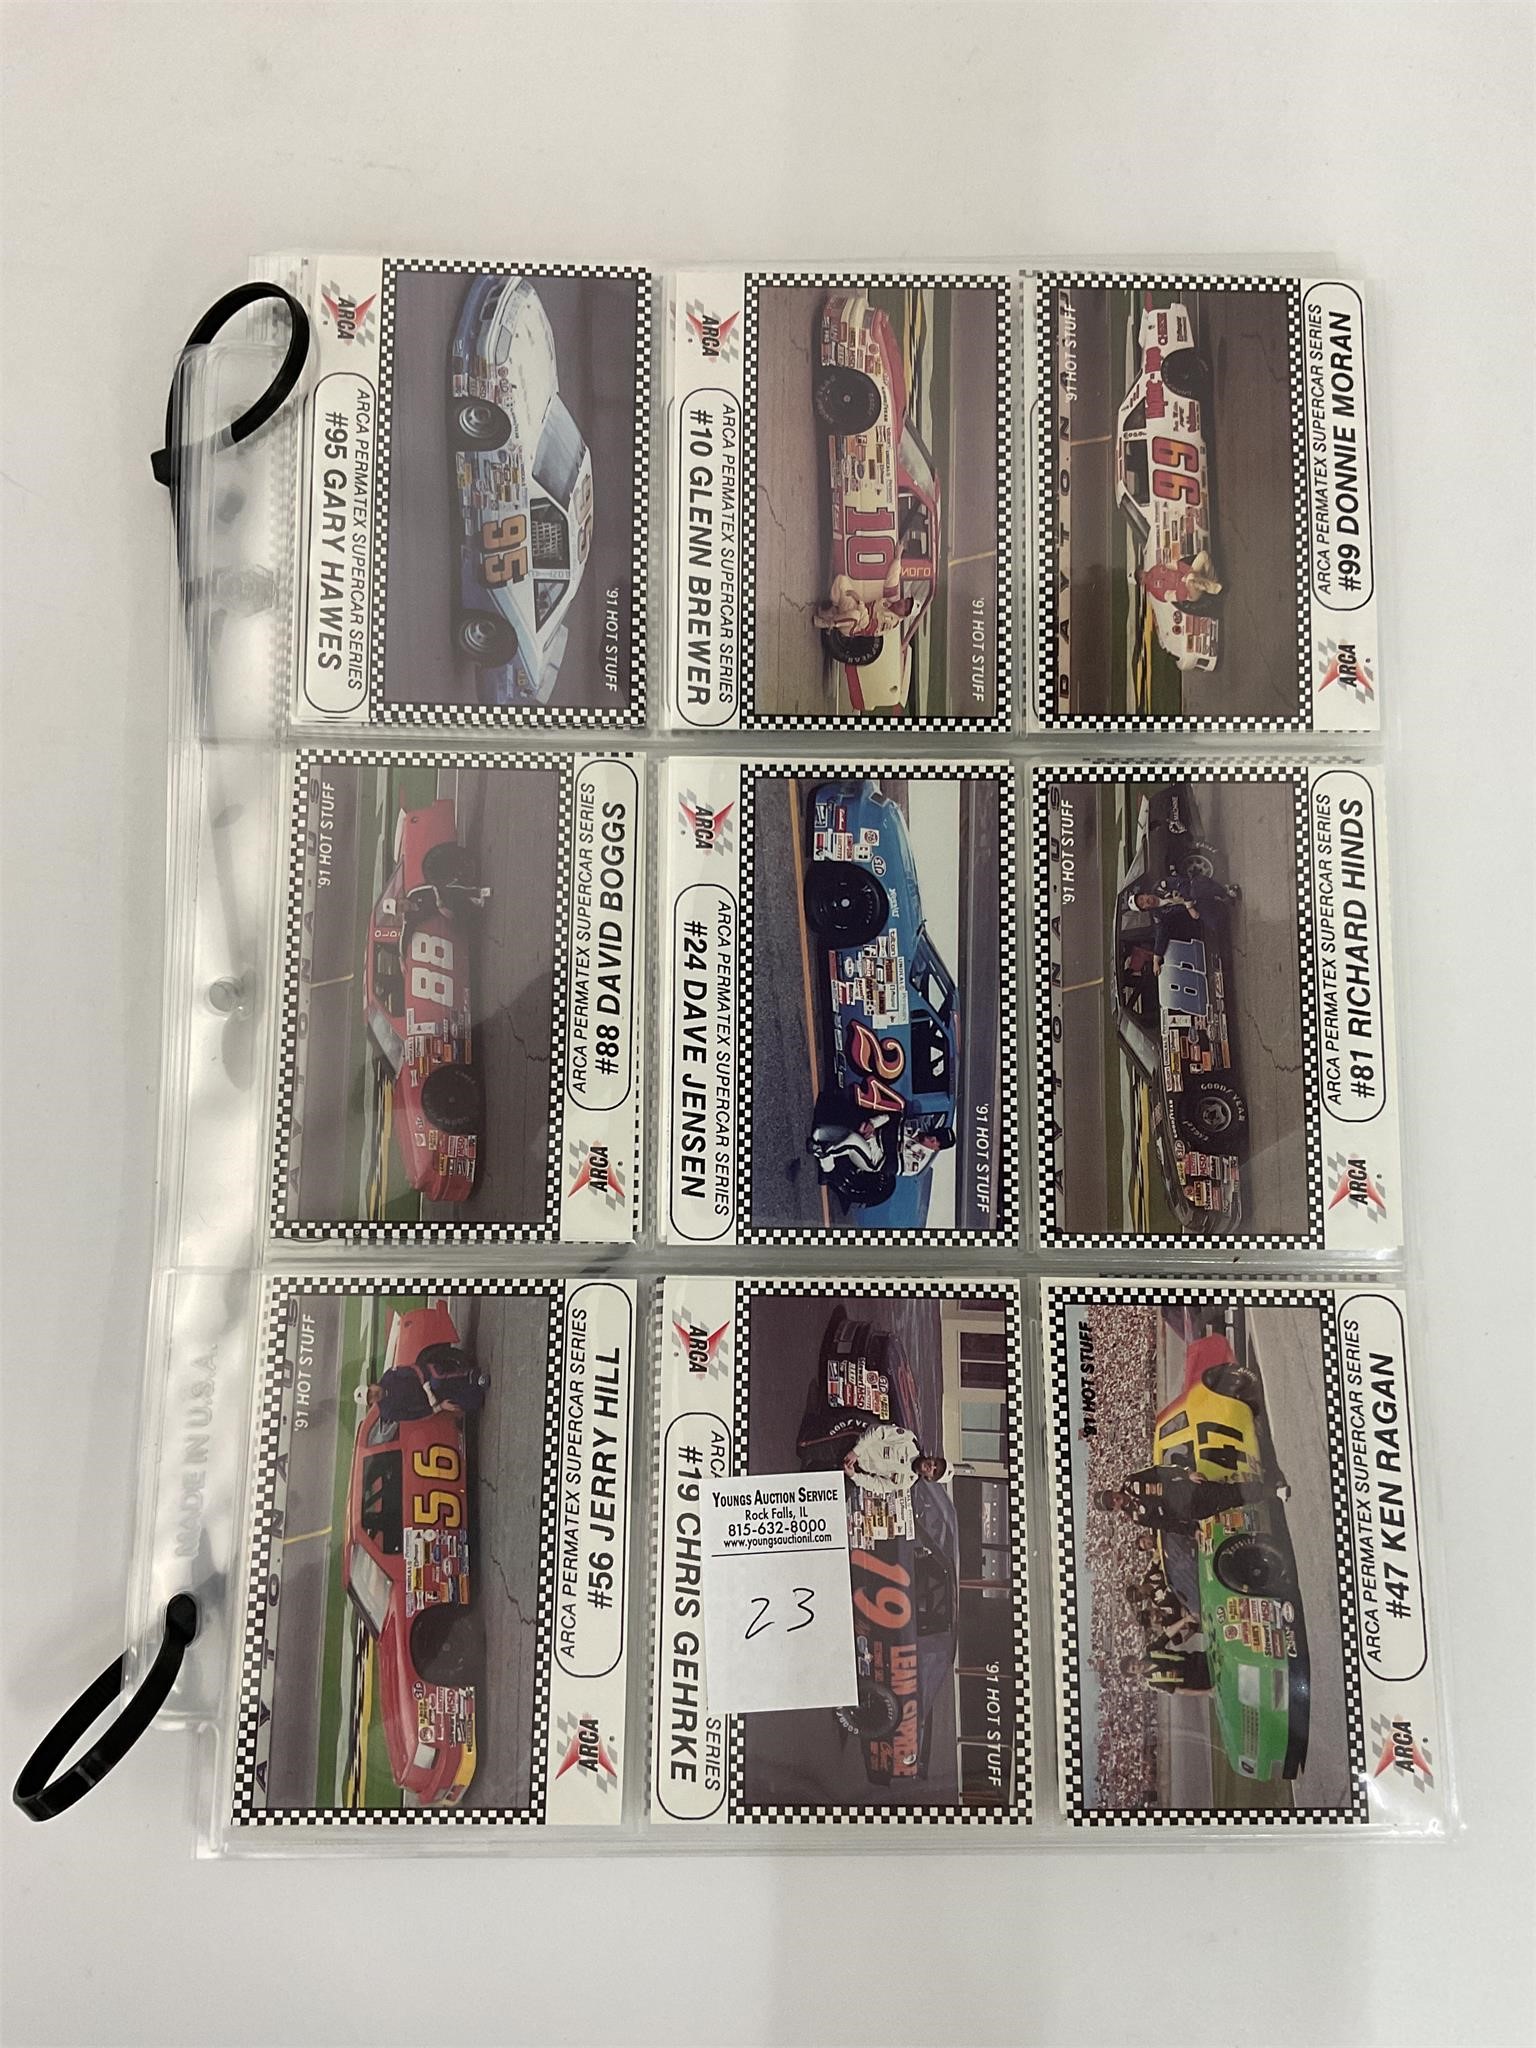 5 sheets of Arca cards, Rockford Illinoois